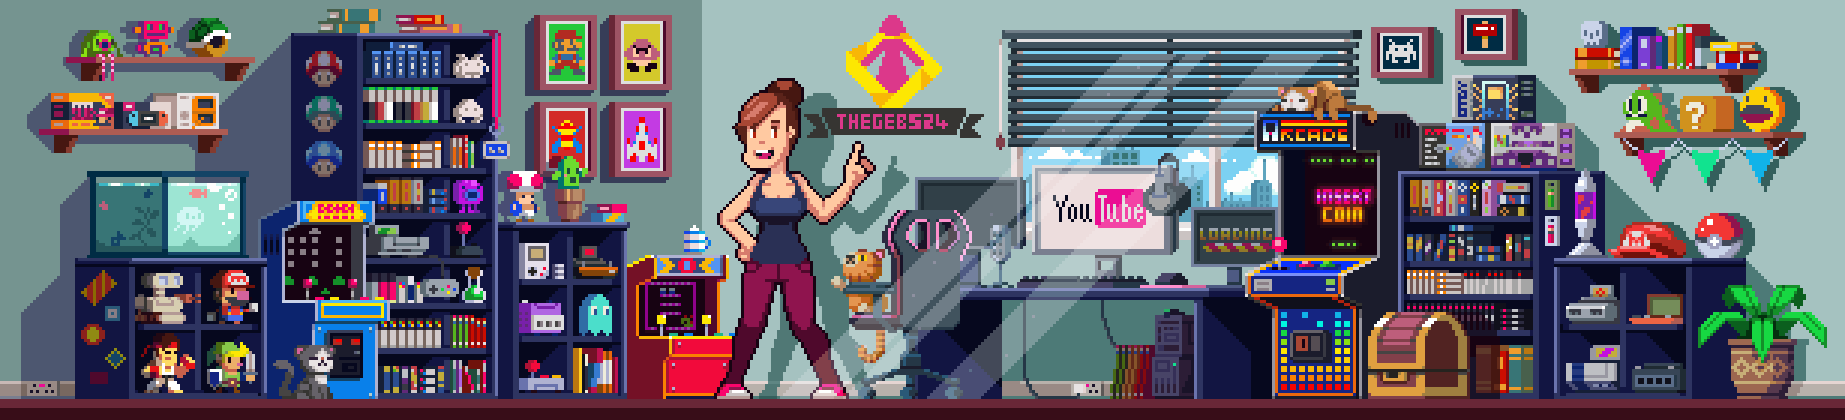 Pixels / Youtube Banner – Army of trolls